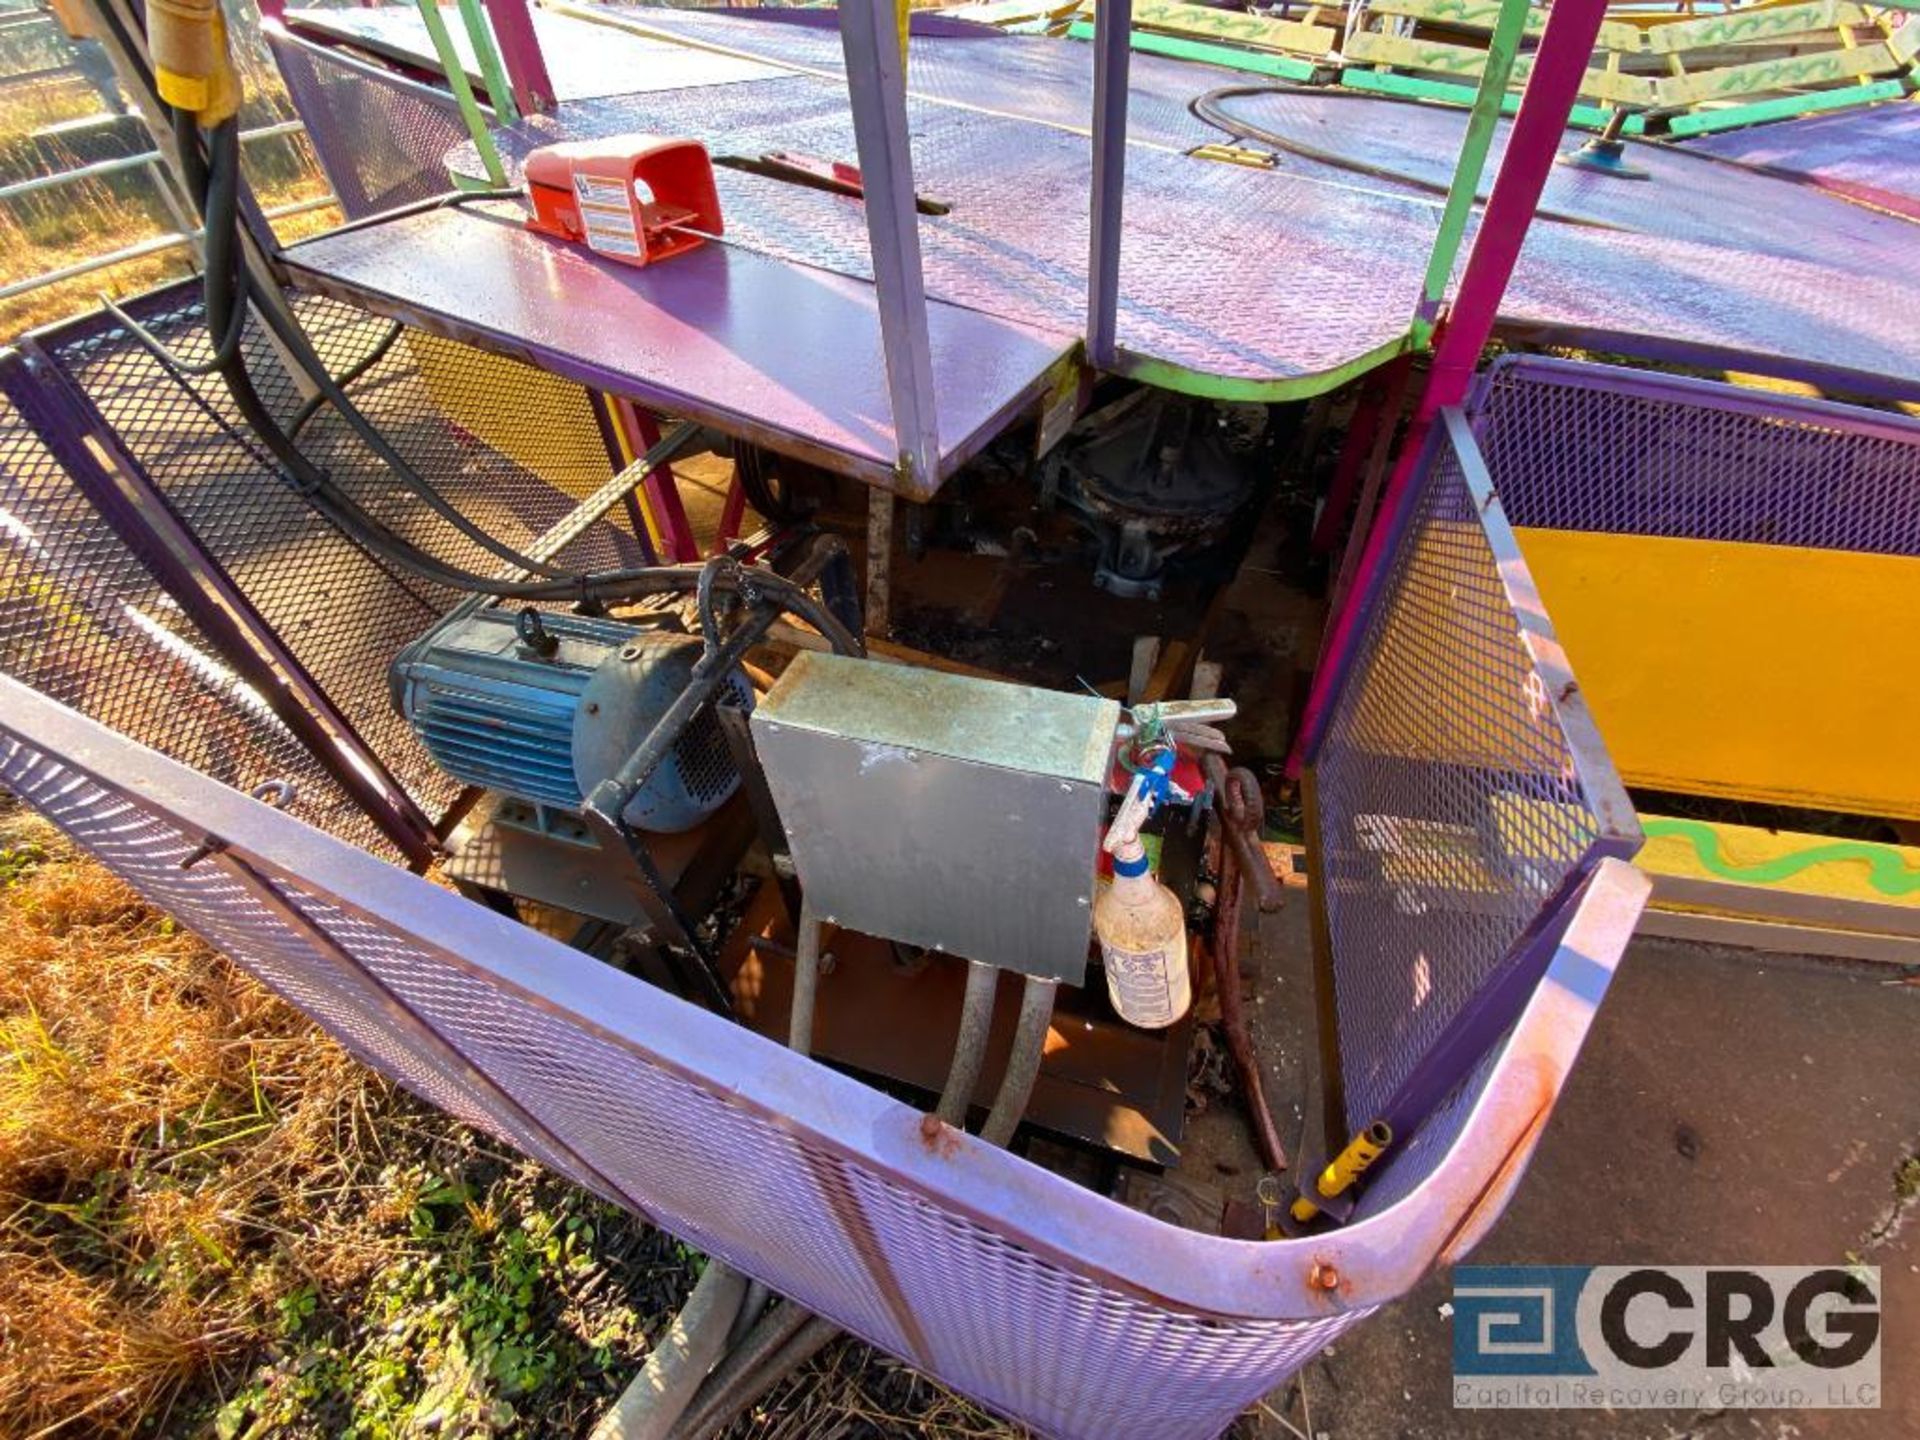 Tilt A Whirl circular ride (Passenger cars, seats, and baskets in storage on the premises, - Image 3 of 5